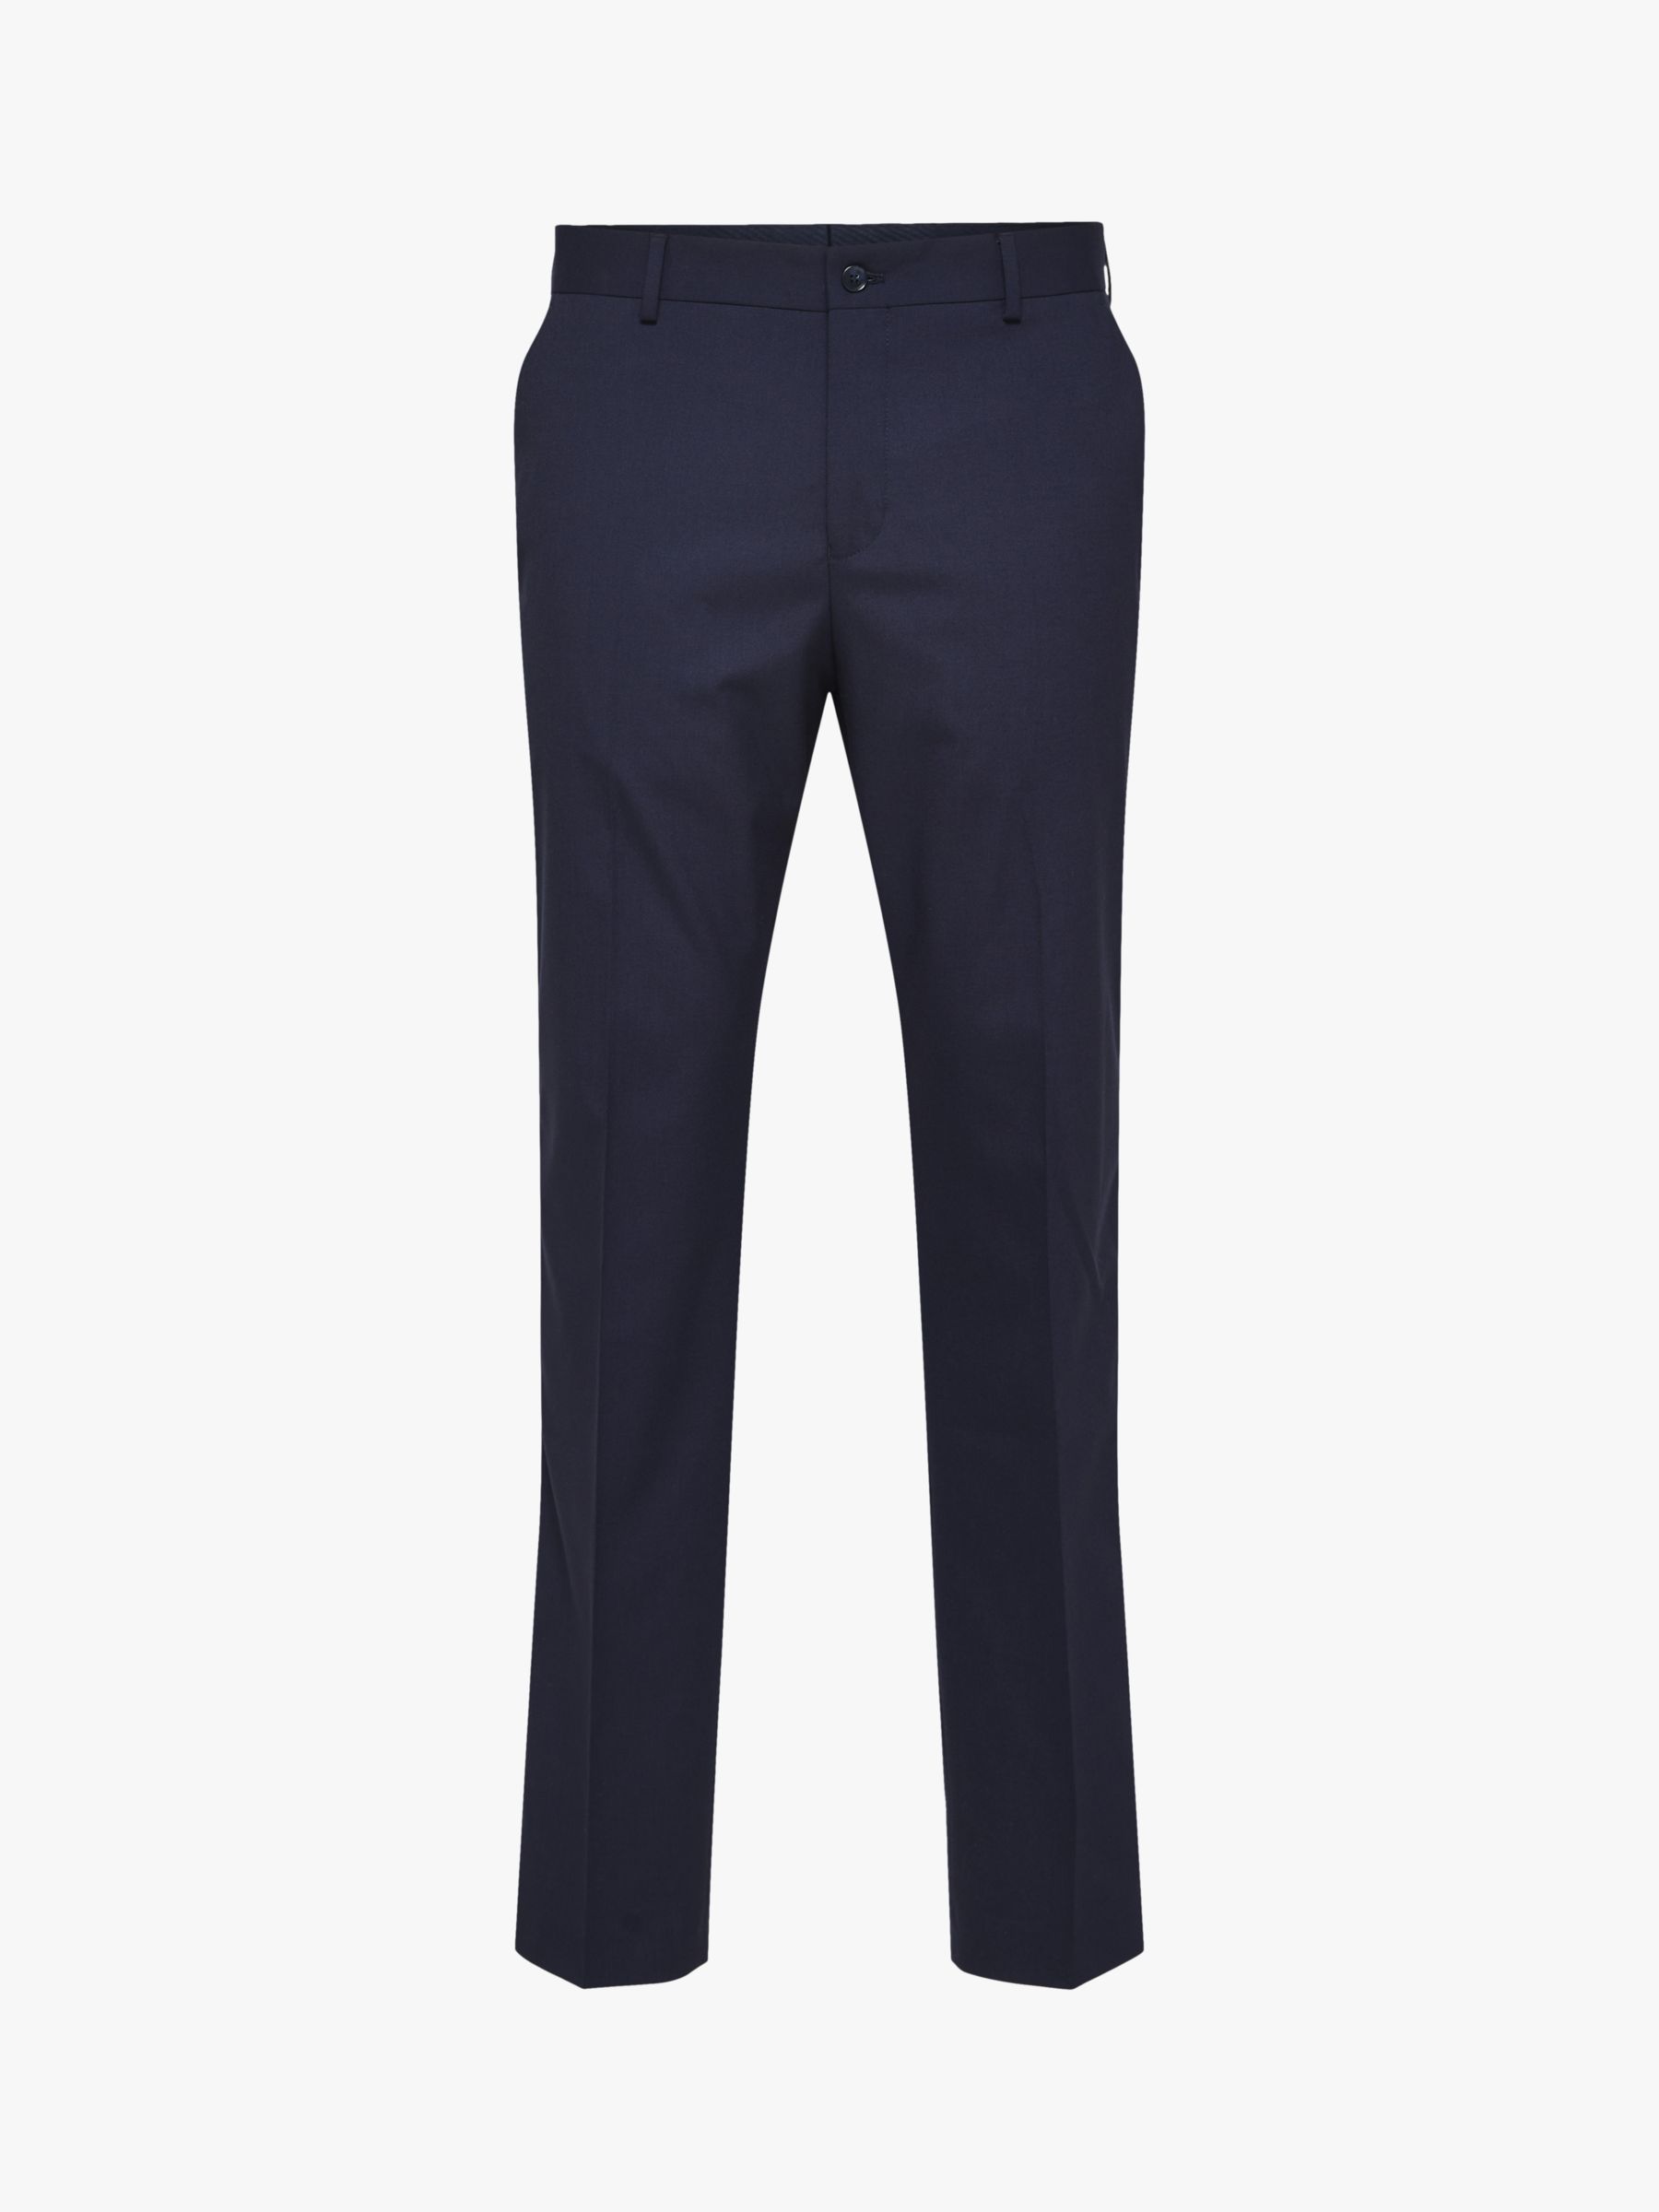 SELECTED HOMME Recycled Polyester Slim Fit Tux Trousers, Navy